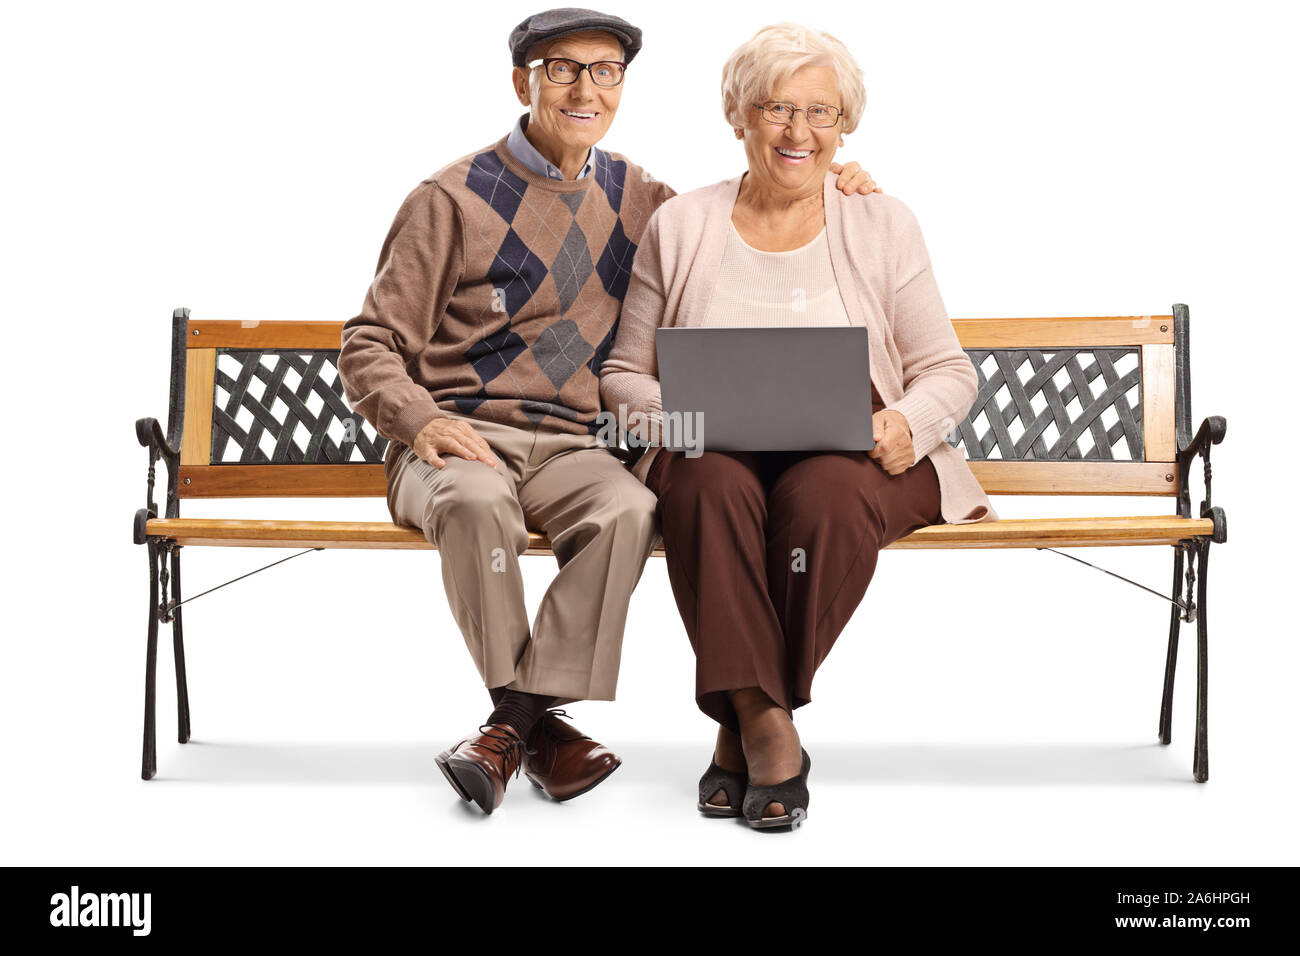 Senior couple on a bench with a laptop computer smiling at the camera isolated on white background Stock Photo